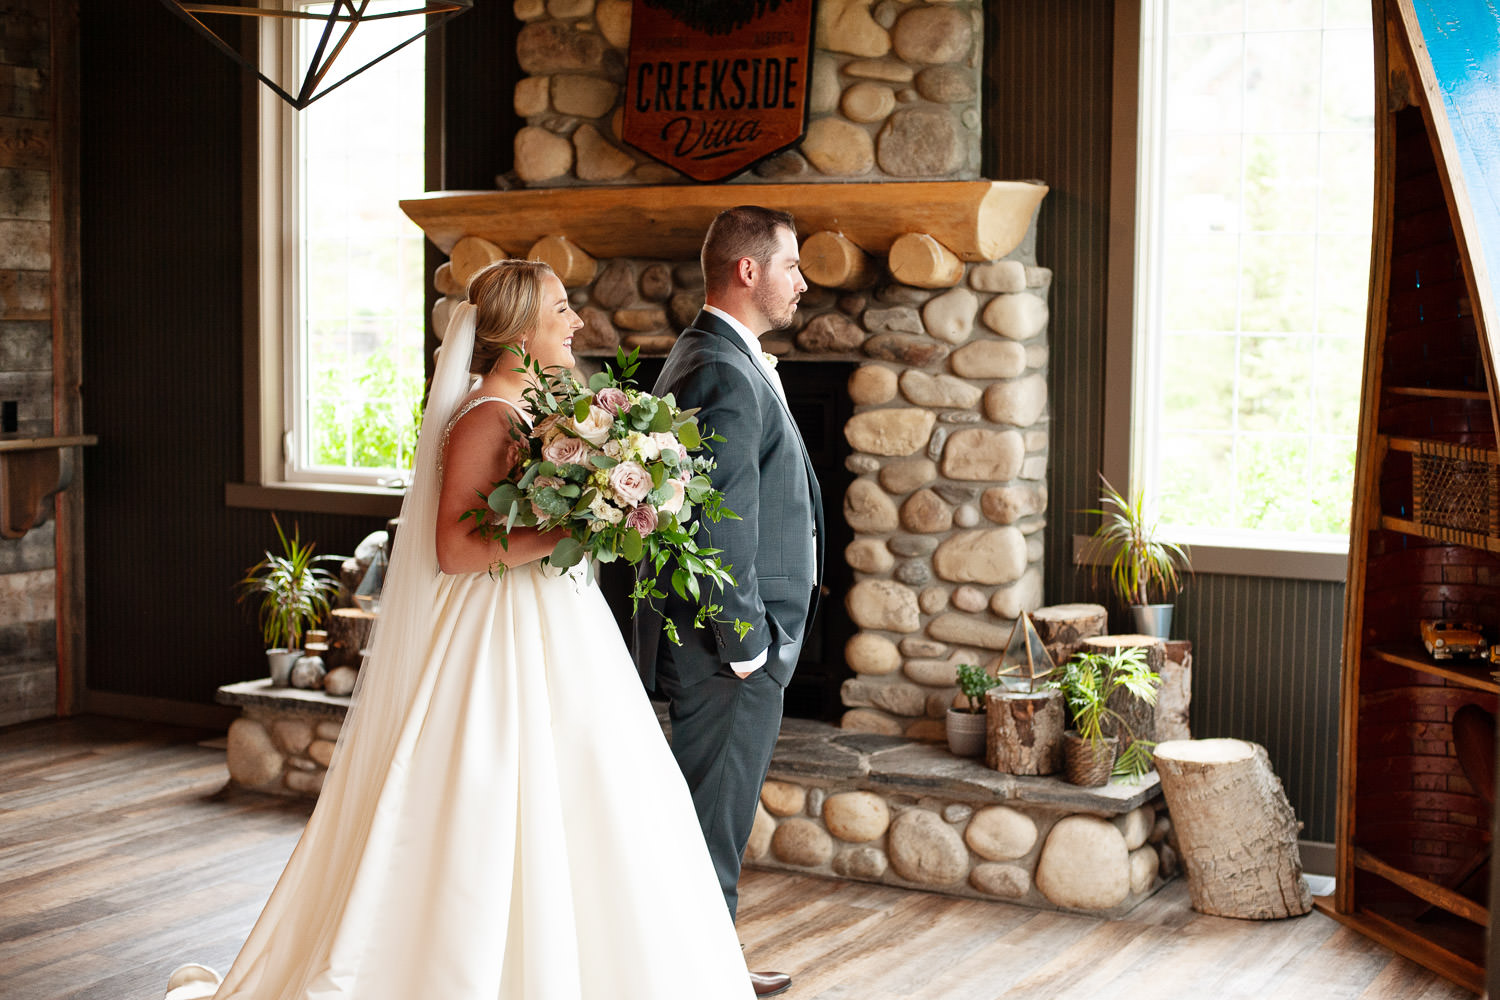 First look before a Creekside Villa wedding captured by Tara Whittaker Photography